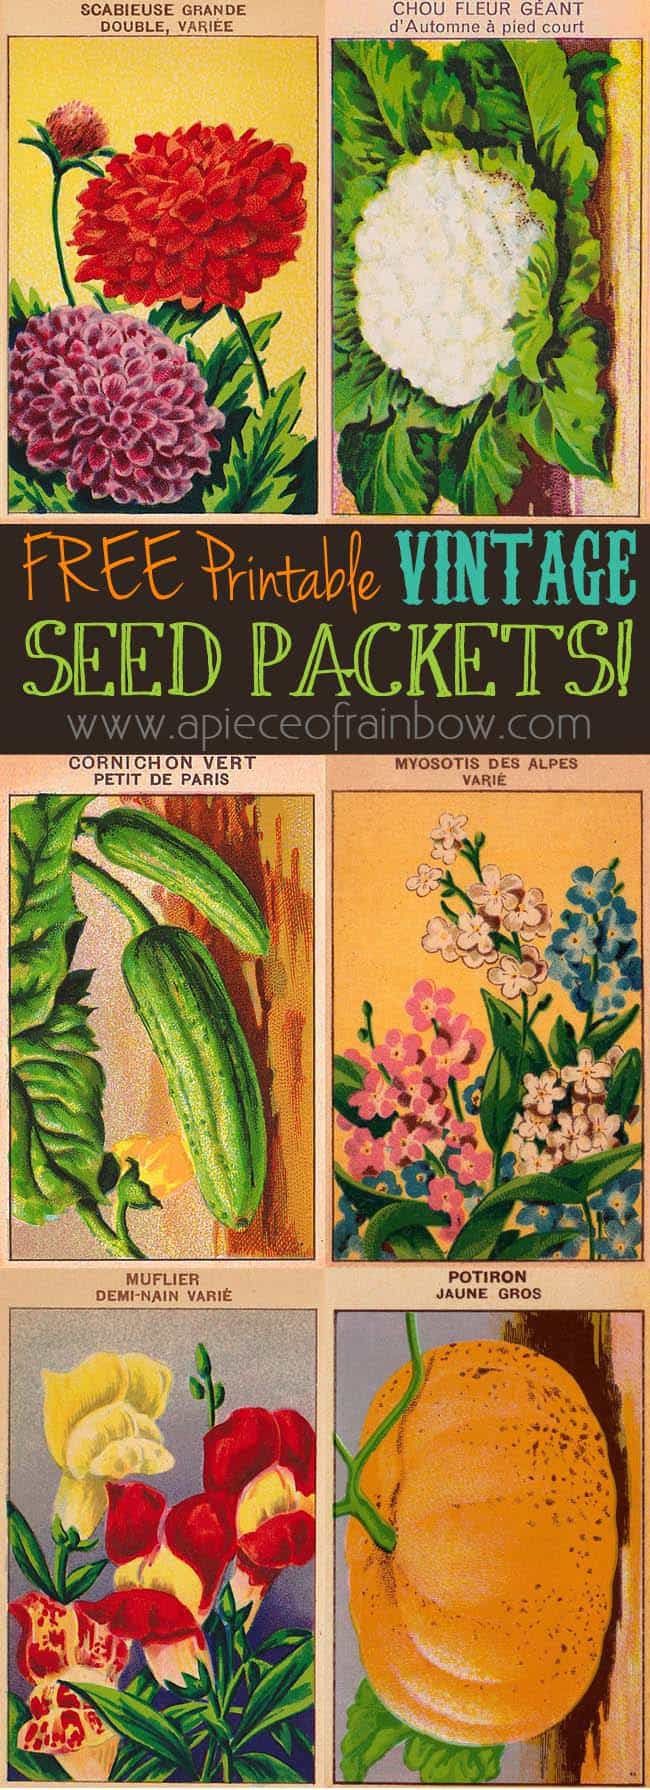 Vintage French Seed Packets Wall Decor Free Printables A Piece Of Rainbow